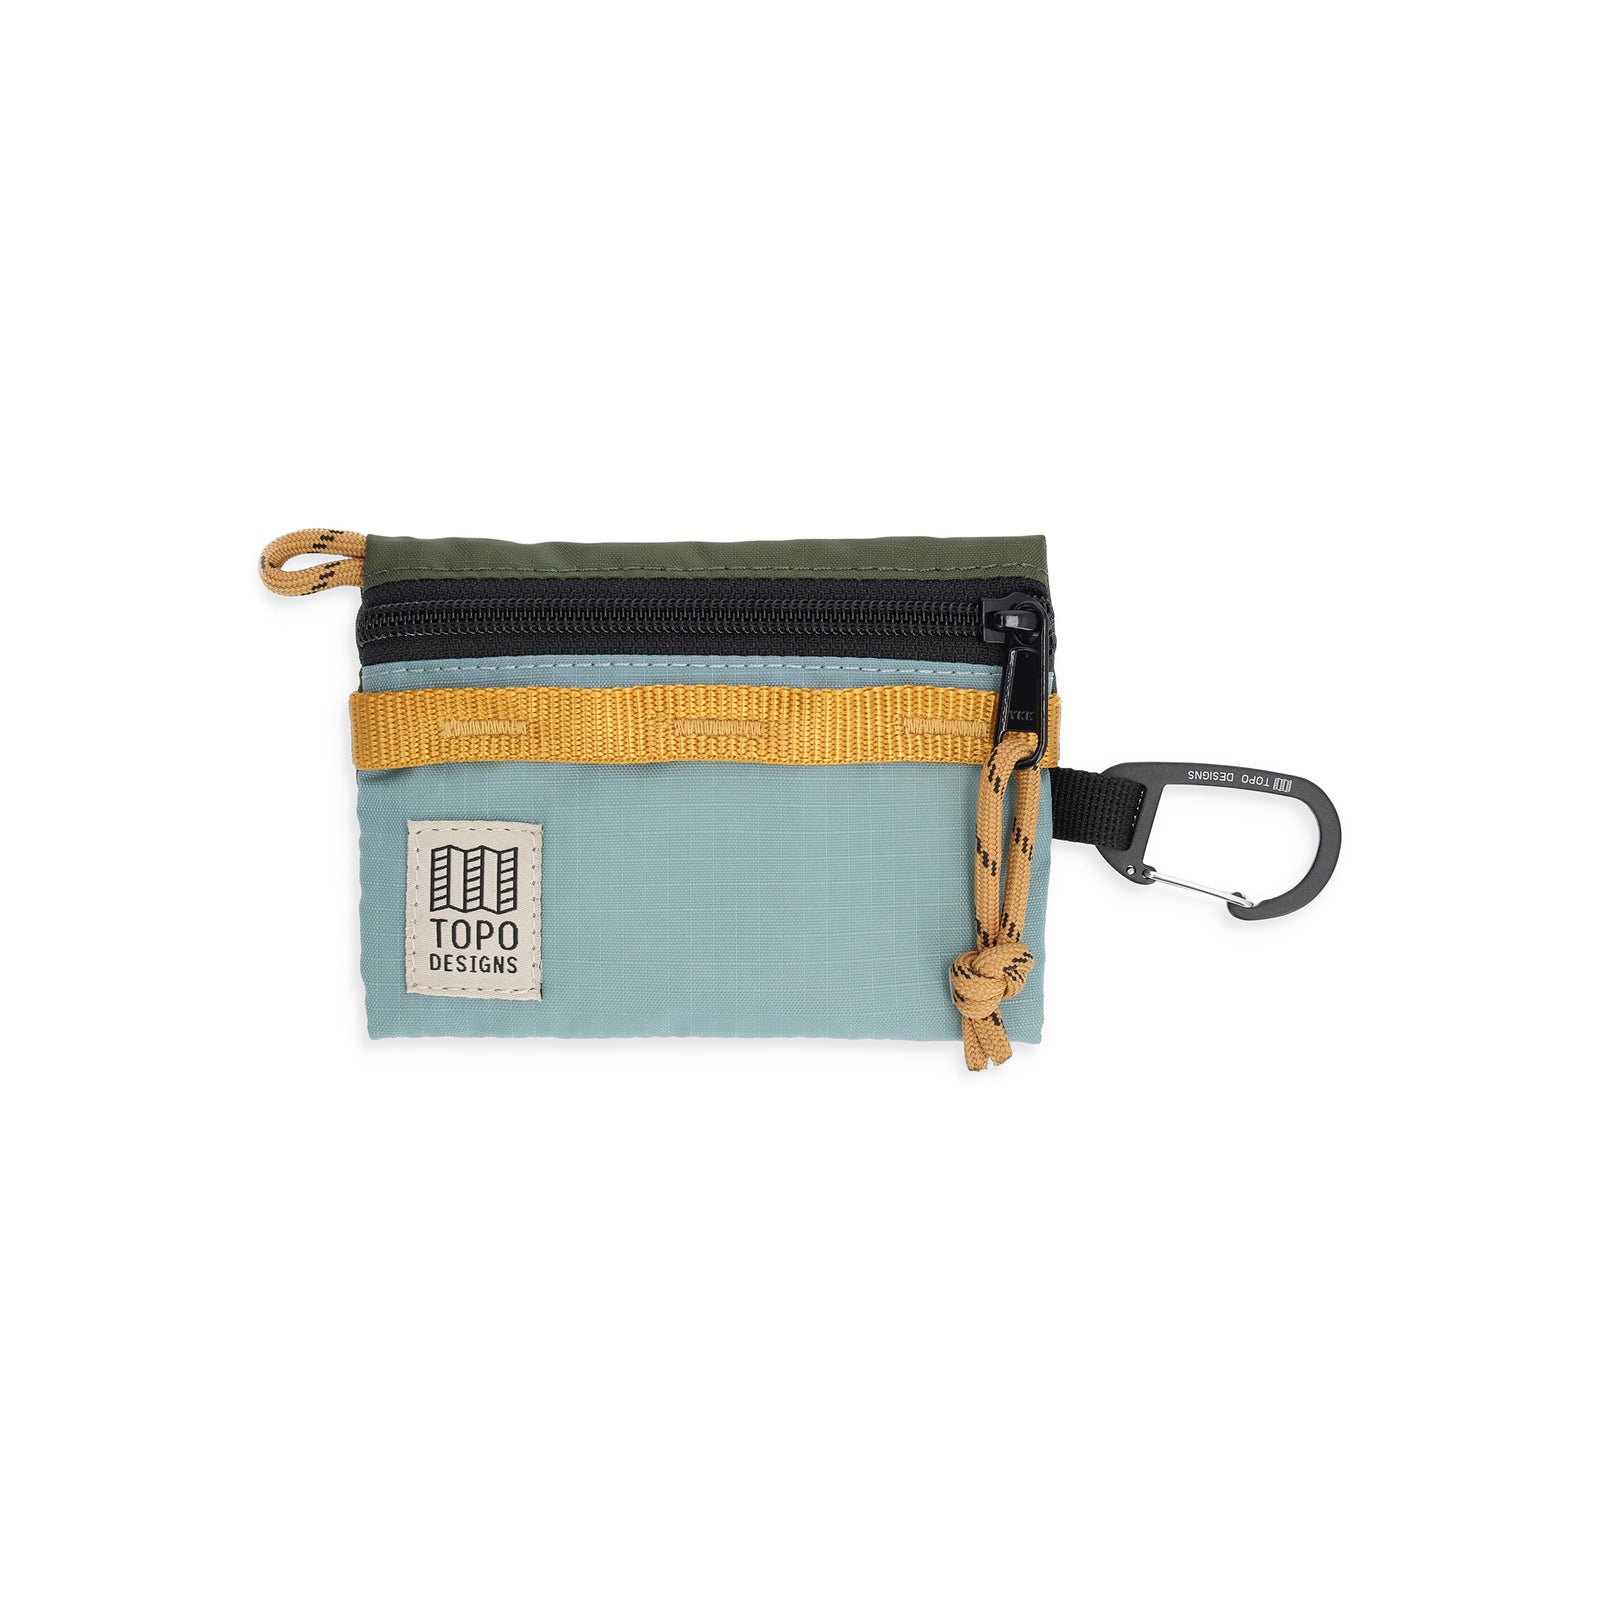 Topo Designs Mountain Accessory Bag carabiner clip pouch keychain wallet in "Olive / Mineral Blue" lightweight recycled nylon.